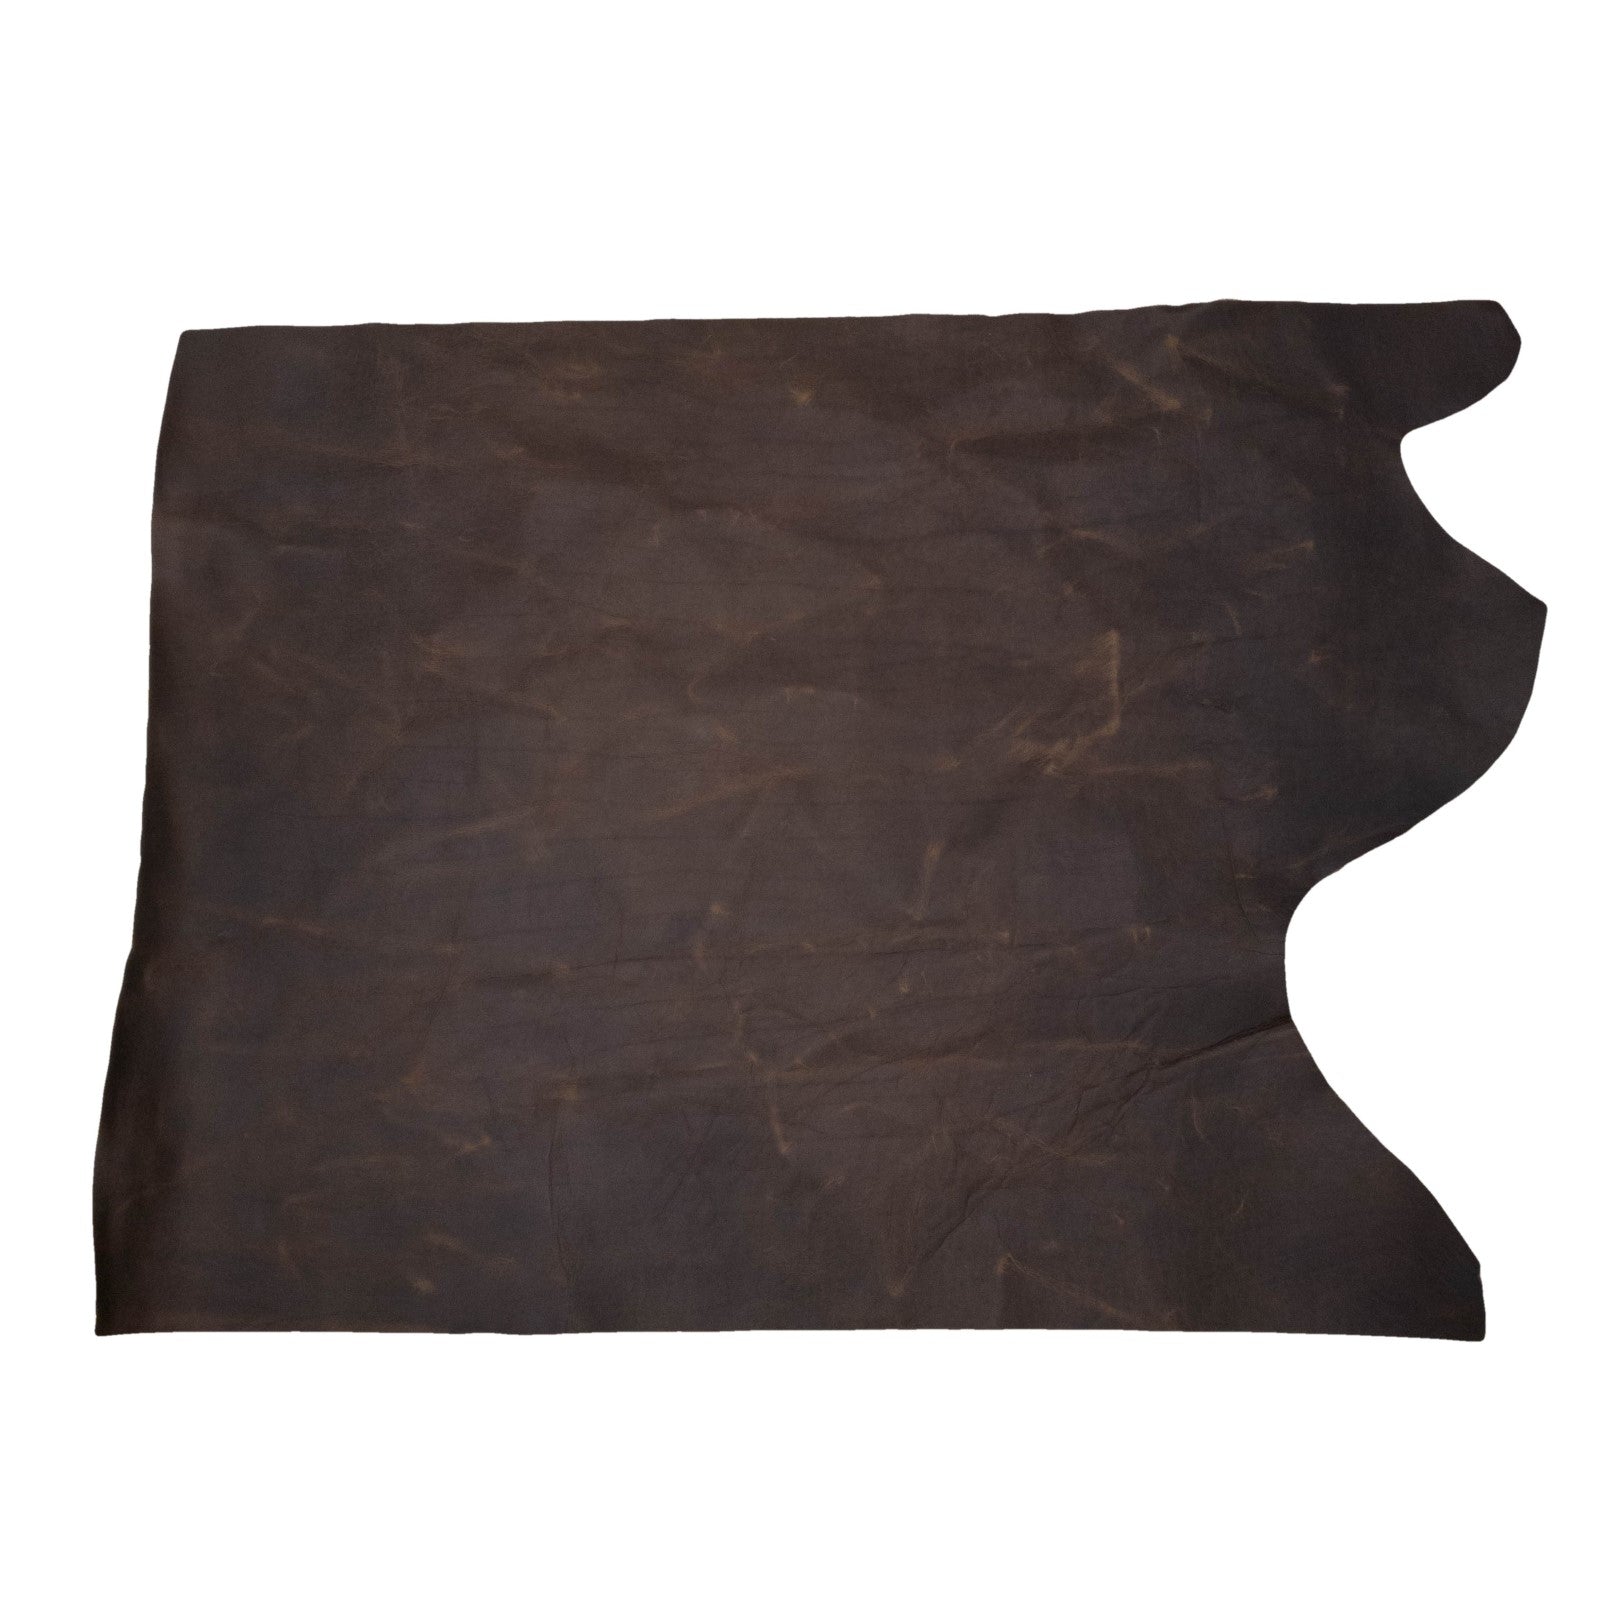 Sleeping Bear Dark Brown, 6.5-32 SqFt, 2-3 oz, Pull up Sides & Pieces, Crazy Buffalo, Middle PIece / 6.5-7.5 | The Leather Guy